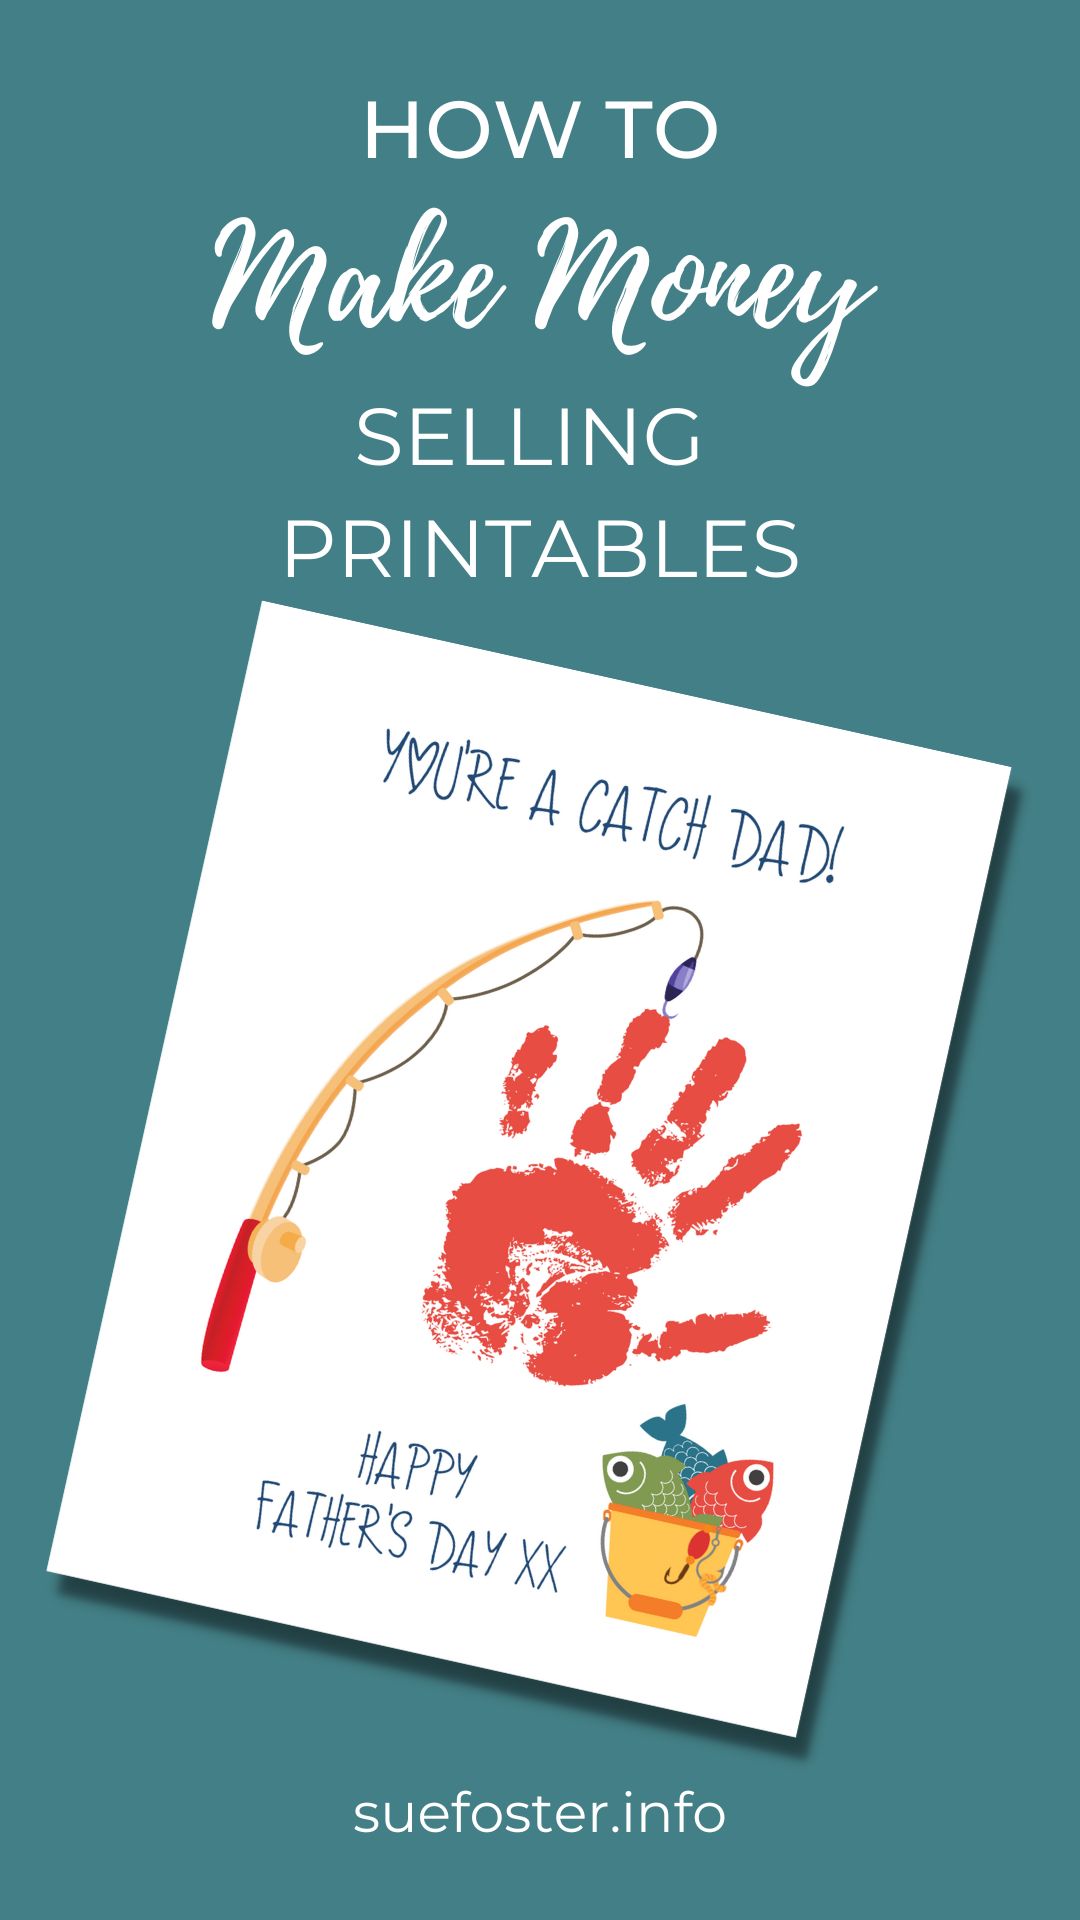 Printables are a fairly easy way to make money because you make them once and they sell over and over. Selling printables is the perfect work-from-home business for making a passive income. Follow these tips on how to make money selling printables.